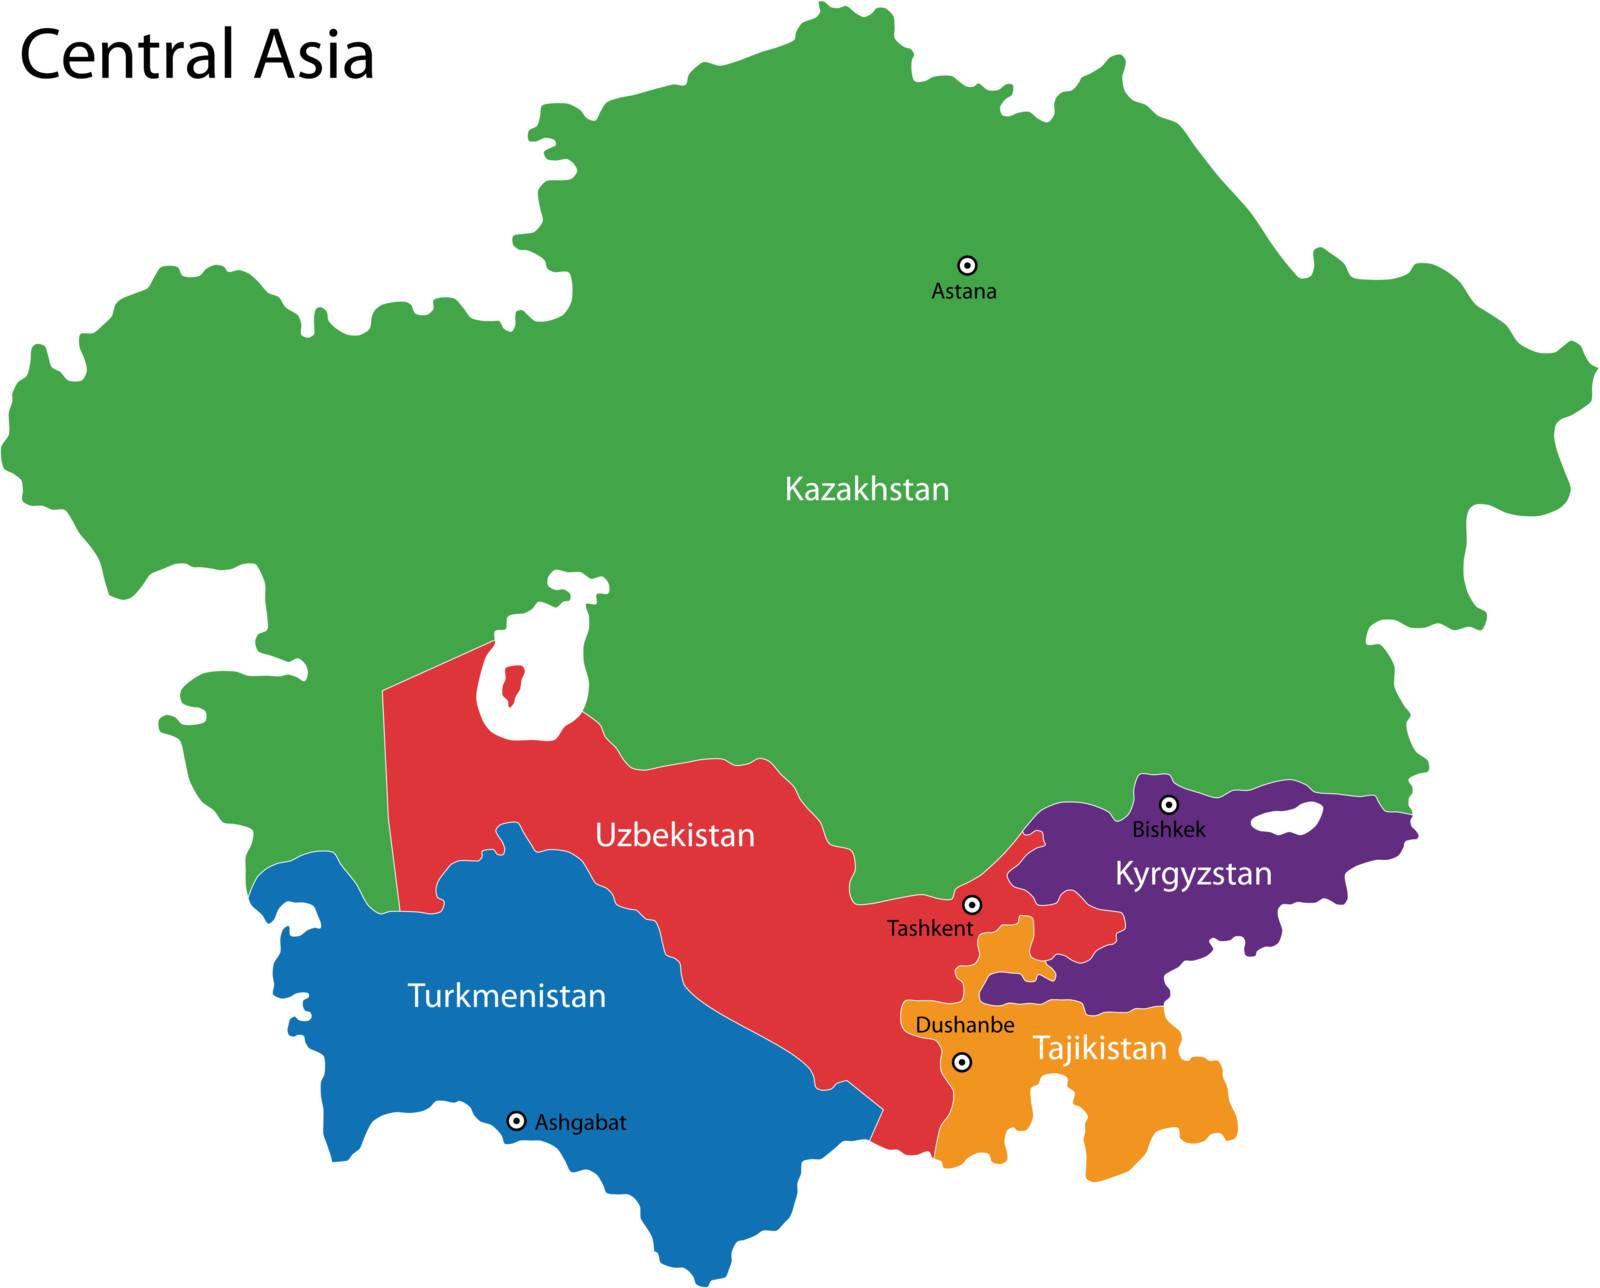 Color map of Central Asia divided by the countries